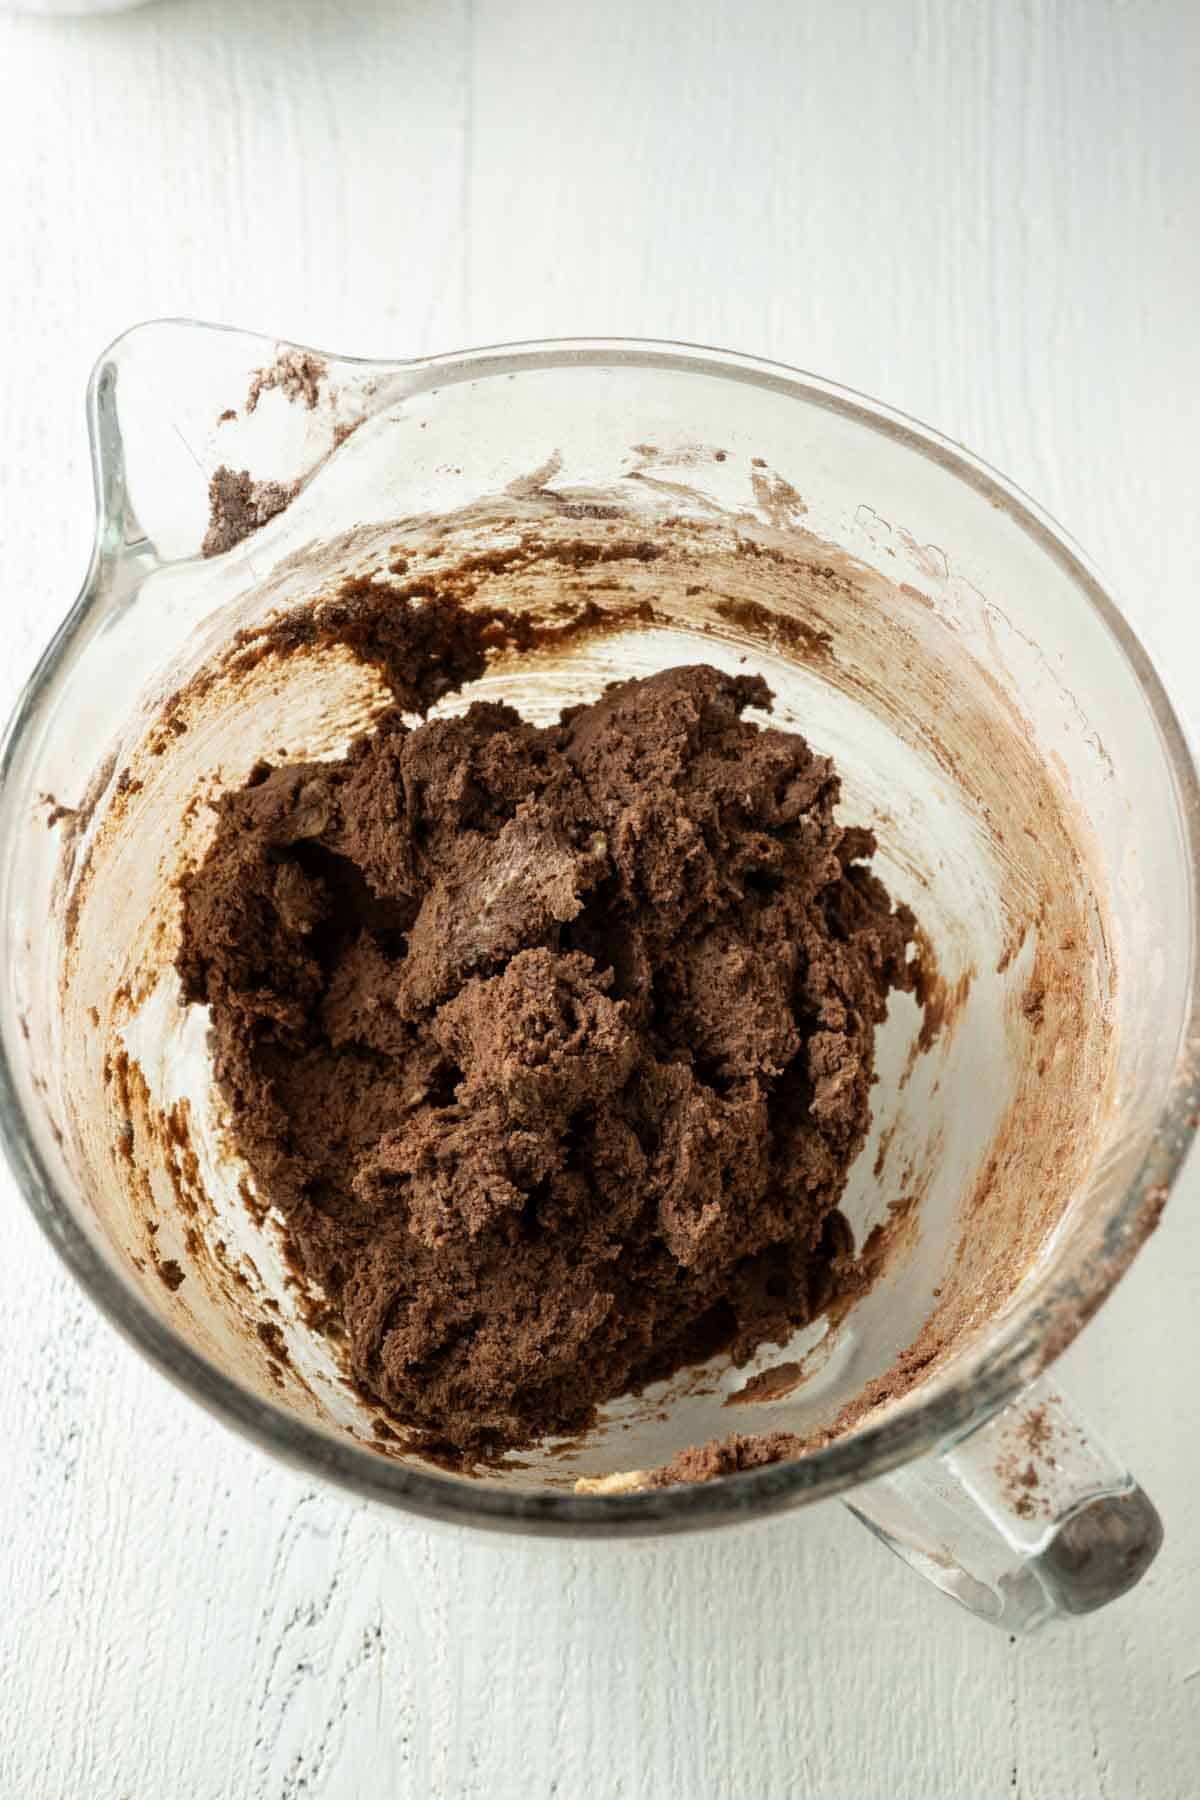 Chocolate cookie dough in a glass mixing bowl.